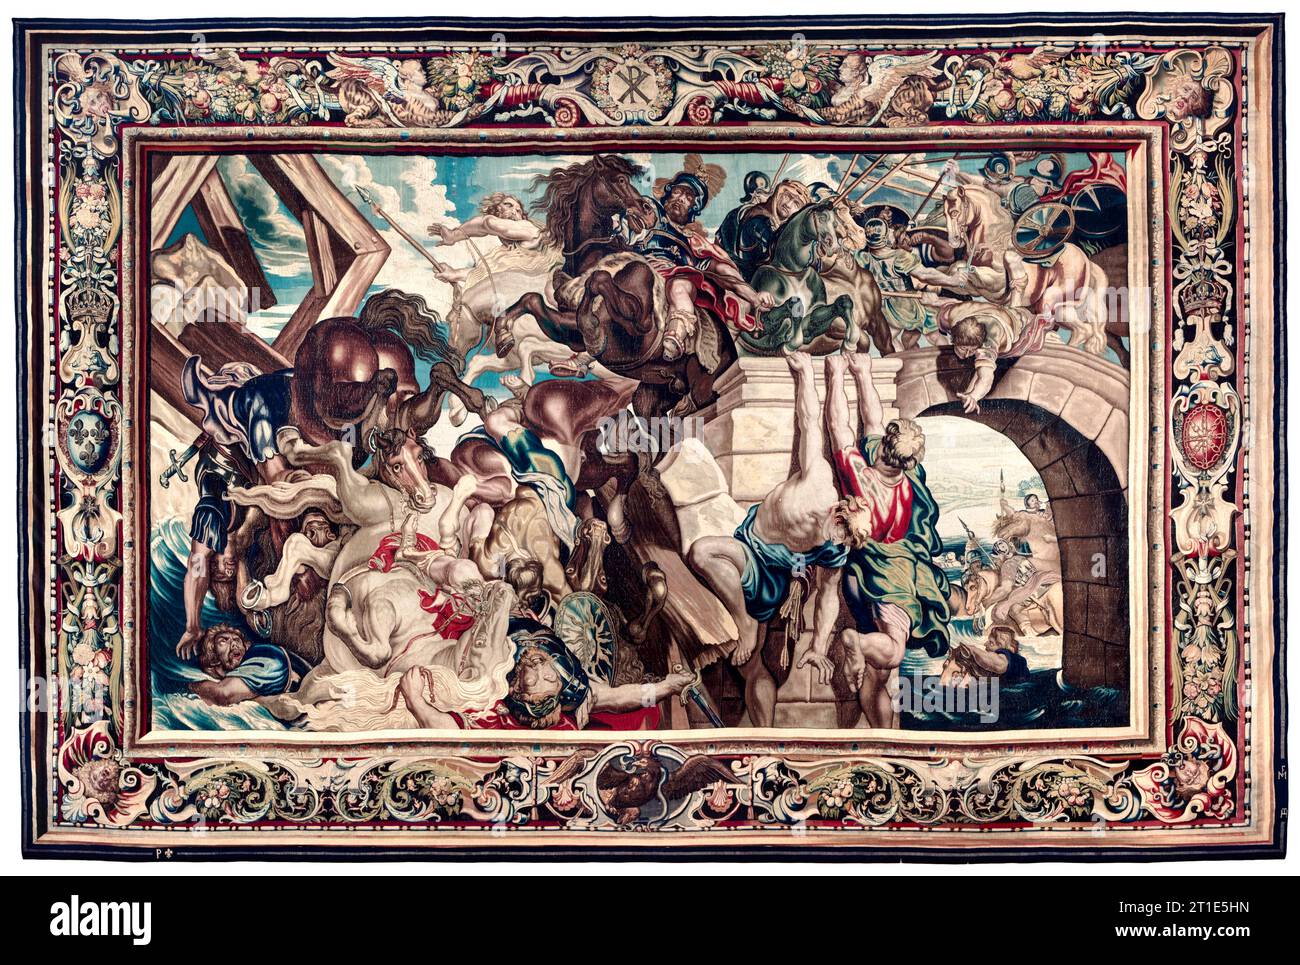 Peter Paul Rubens (designer), Triumph of Constantine over Maxentius at the Battle of the Milvian Bridge, tapestry in wool and silk with gold and silver threads, 1623-1625 Stock Photo